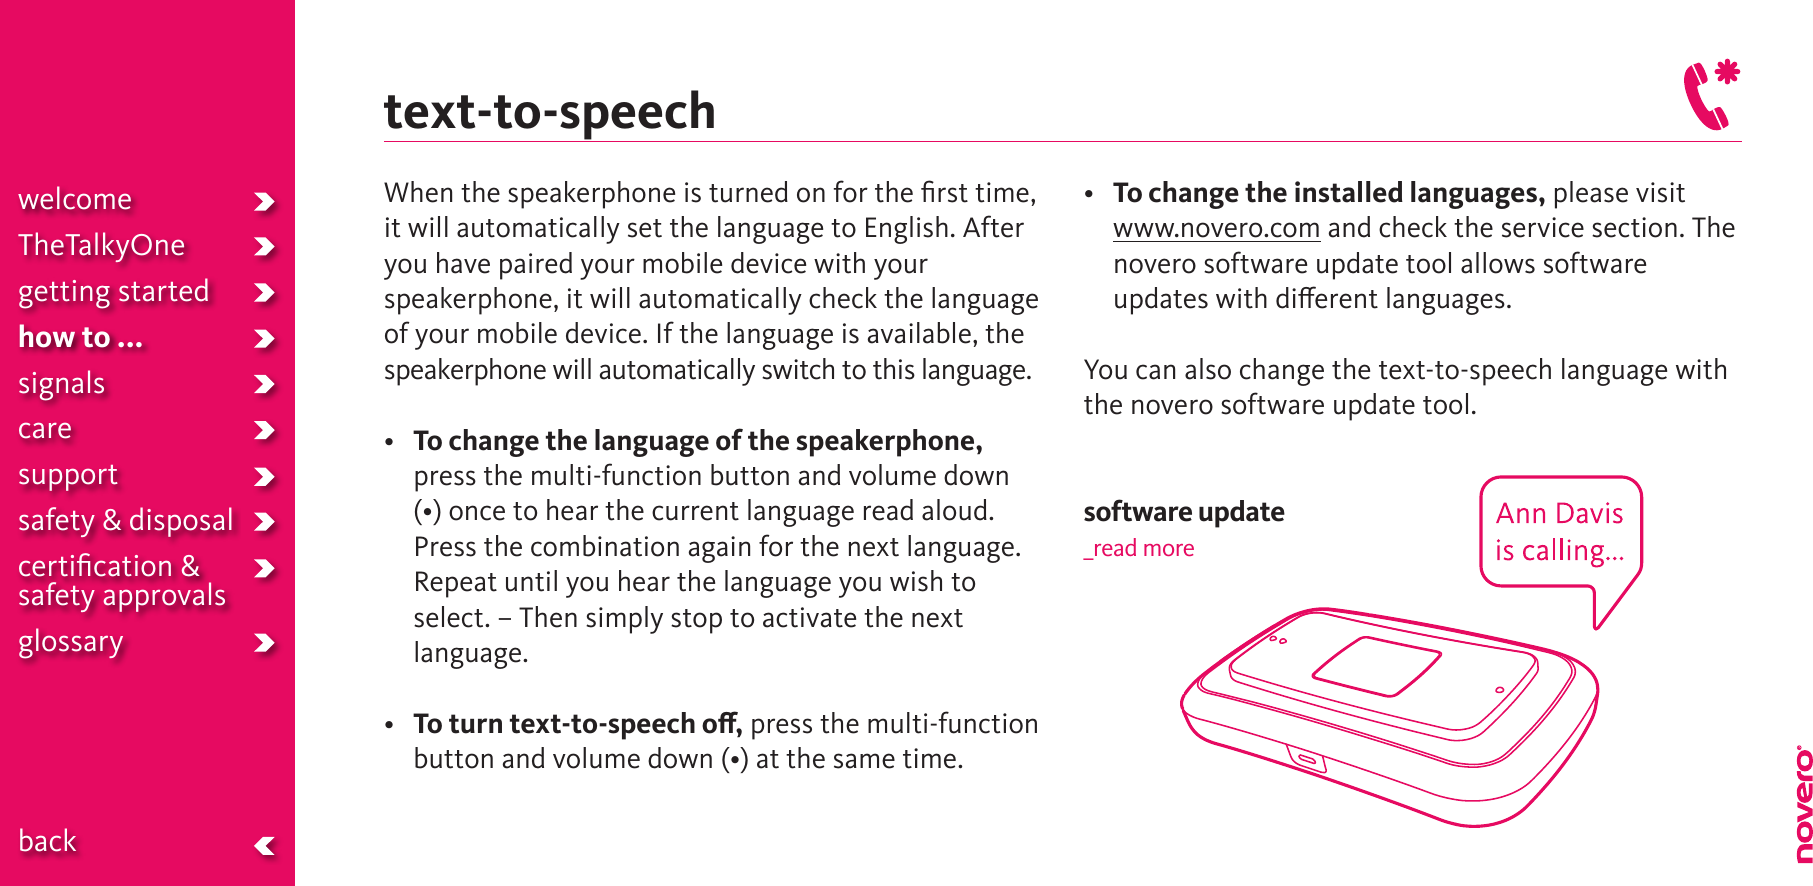 When the speakerphone is turned on for the ﬁrst time, it will automatically set the language to English. After you have paired your mobile device with your speakerphone, it will automatically check the language of your mobile device. If the language is available, the speakerphone will automatically switch to this language. • To change the language of the speakerphone, press the multi-function button and volume down (•)oncetohearthecurrentlanguagereadaloud.Press the combination again for the next language. Repeat until you hear the language you wish to select. – Then simply stop to activate the next language.• To turn text-to-speech o, press the multi-function buttonandvolumedown(•)atthesametime.• To change the installed languages, please visit  www.novero.com and check the service section. The novero software update tool allows software updates with dierent languages. You can also change the text-to-speech language with the novero software update tool. software update_read moretext-to-speechwelcomeTheTalkyOnegetting startedhow to ...signalscaresupportsafety &amp; disposalcertiﬁcation &amp;  safety approvals glossary  back